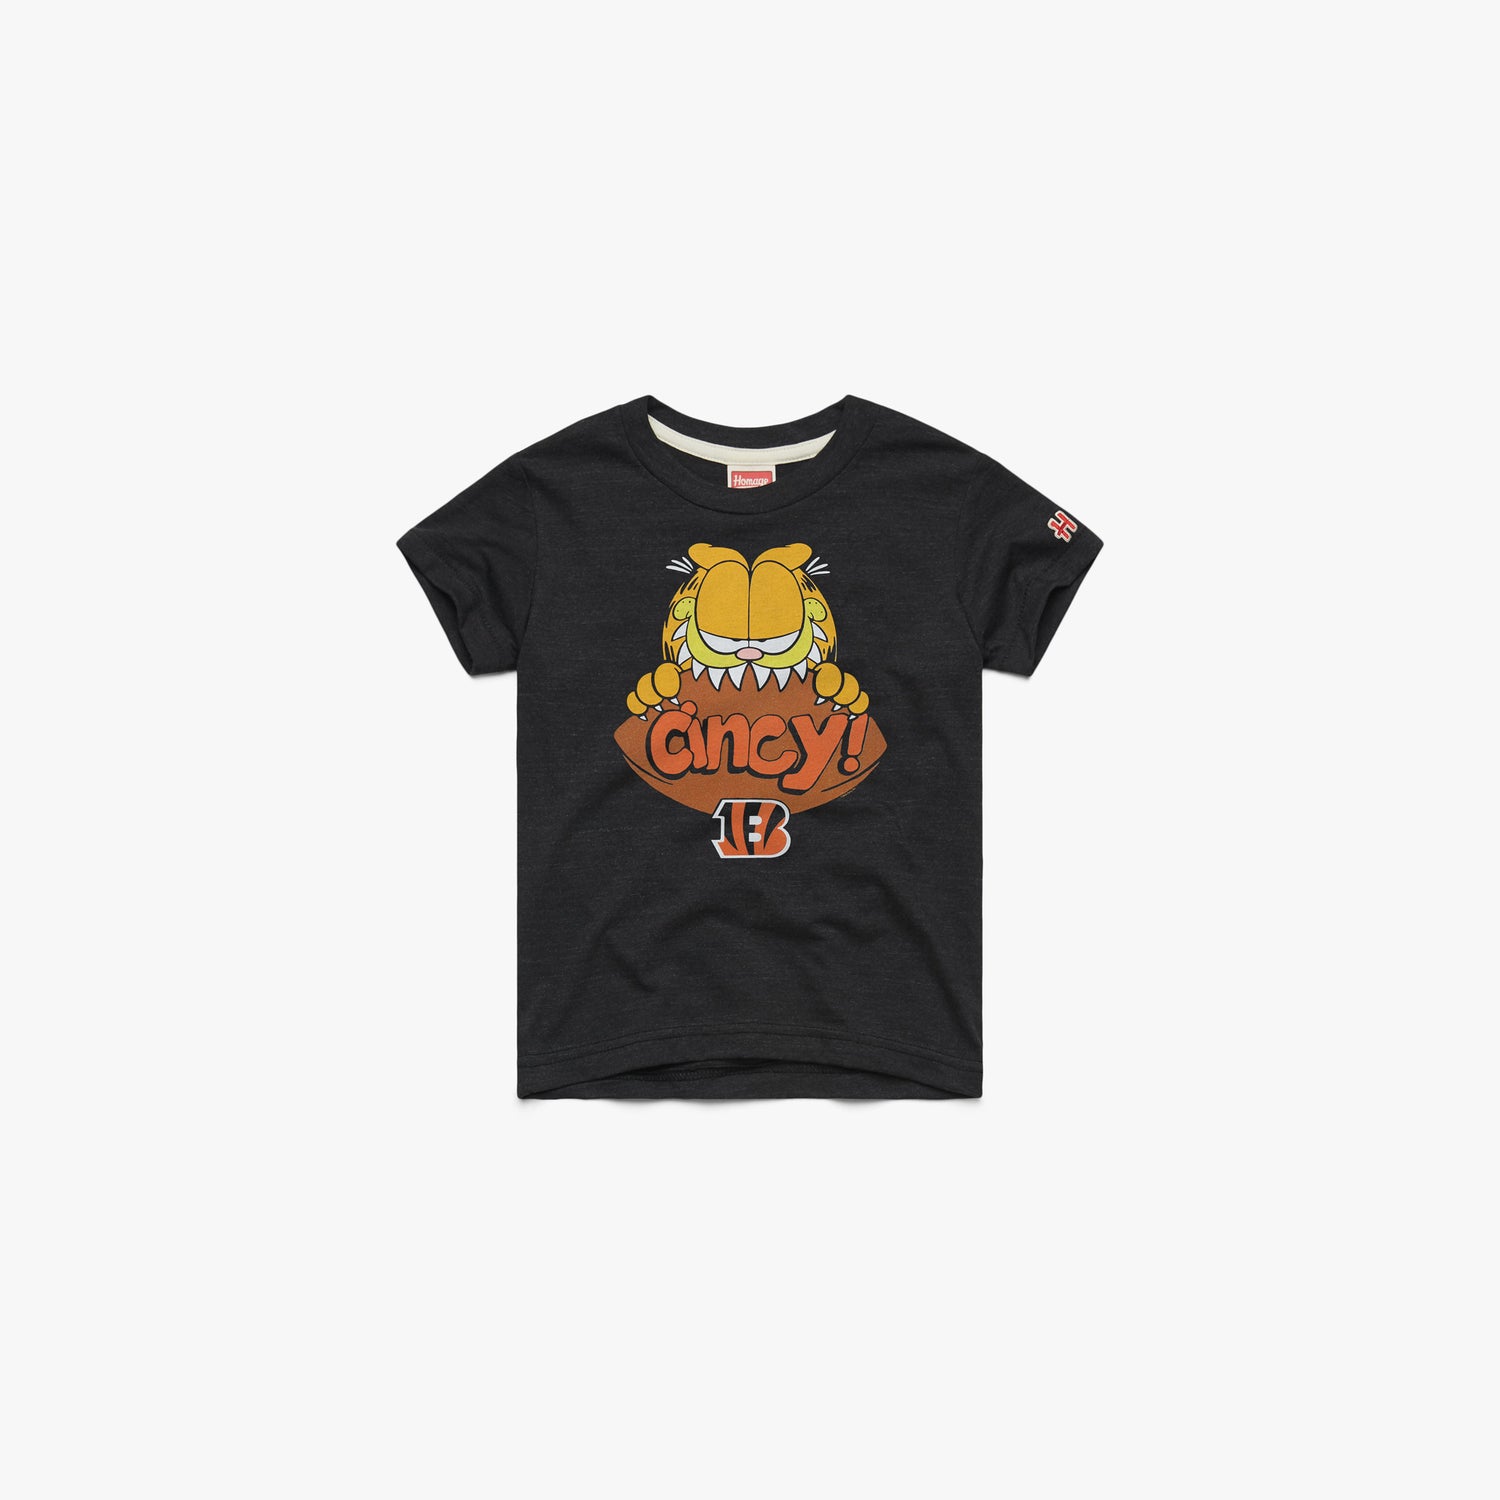 Youth Garfield x Cincinnati Bengals Youth T-Shirt from Homage. | Officially Licensed Vintage NFL Apparel from Homage Pro Shop.